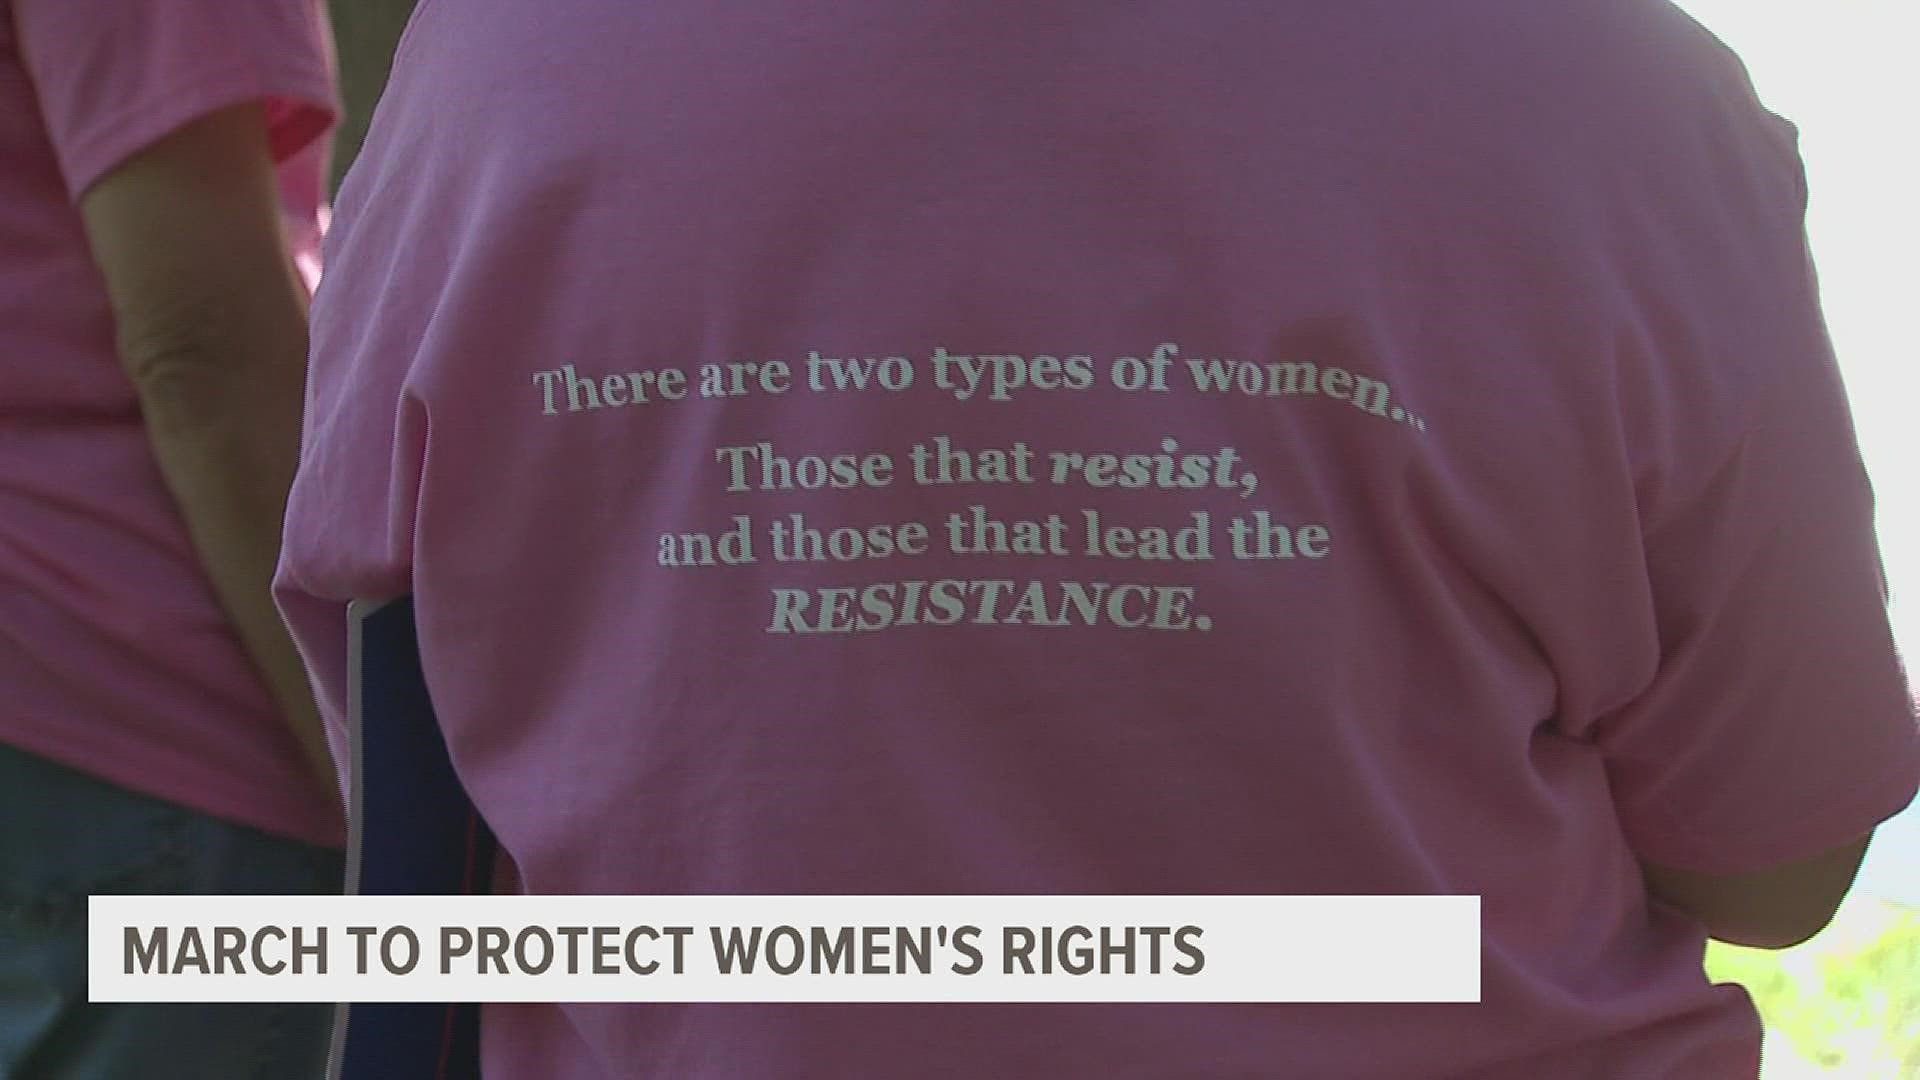 A group of people took to the streets to speak out on women's rights